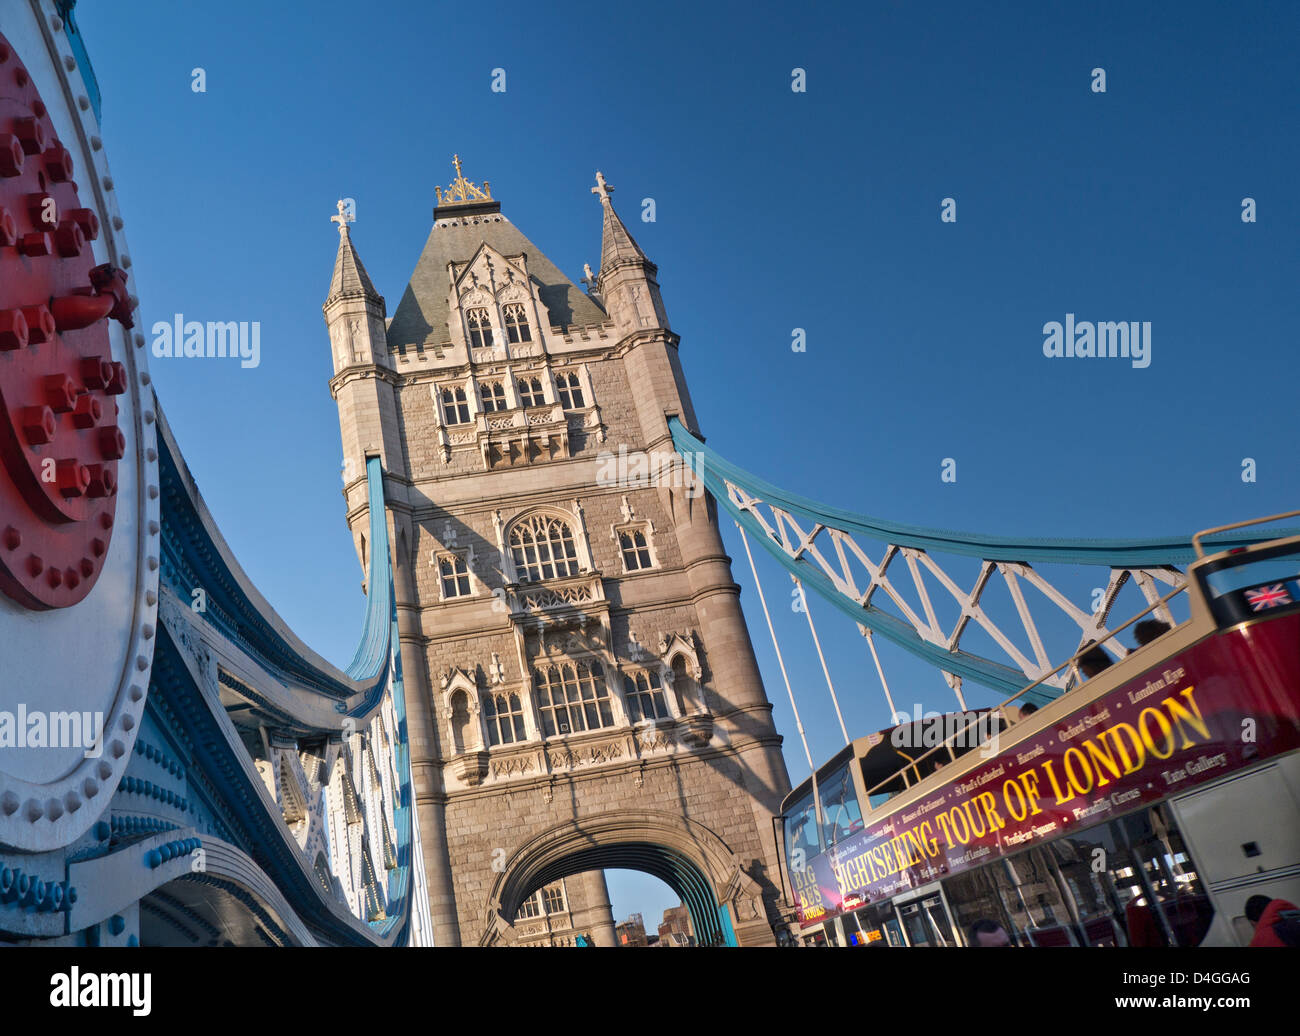 London Staycation Tower Bridge and official tourist 'Tour of London' bus Southwark London UK Stock Photo